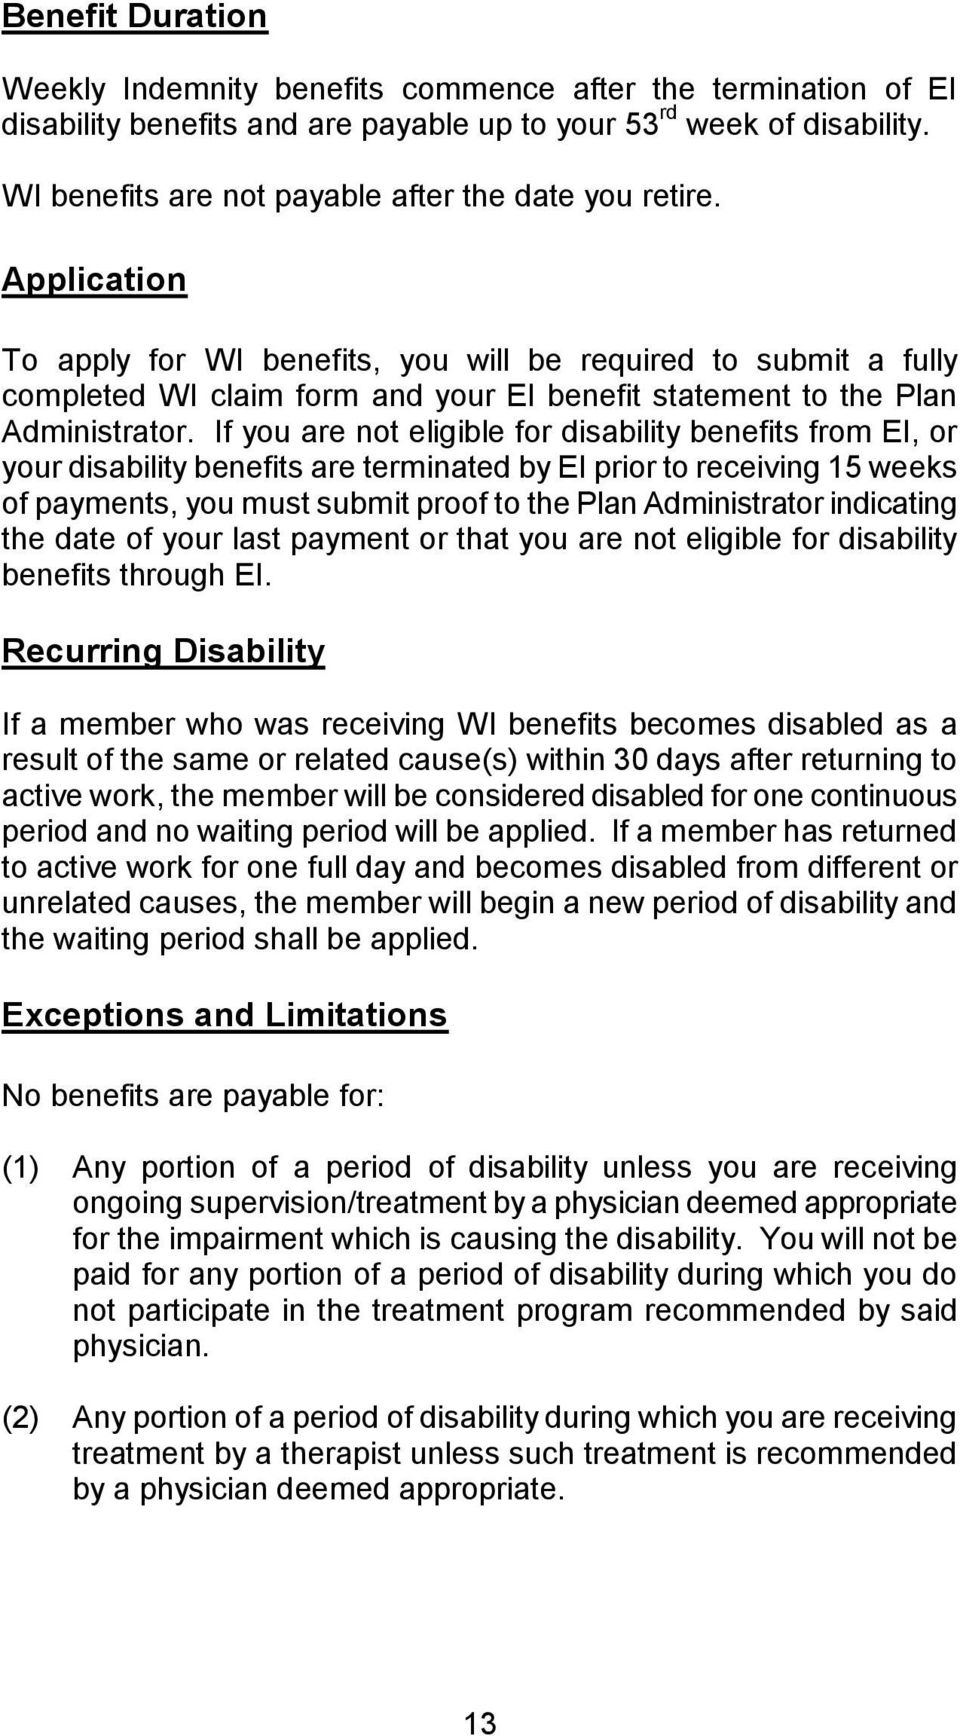 Application To apply for WI benefits, you will be required to submit a fully completed WI claim form and your EI benefit statement to the Plan Administrator.